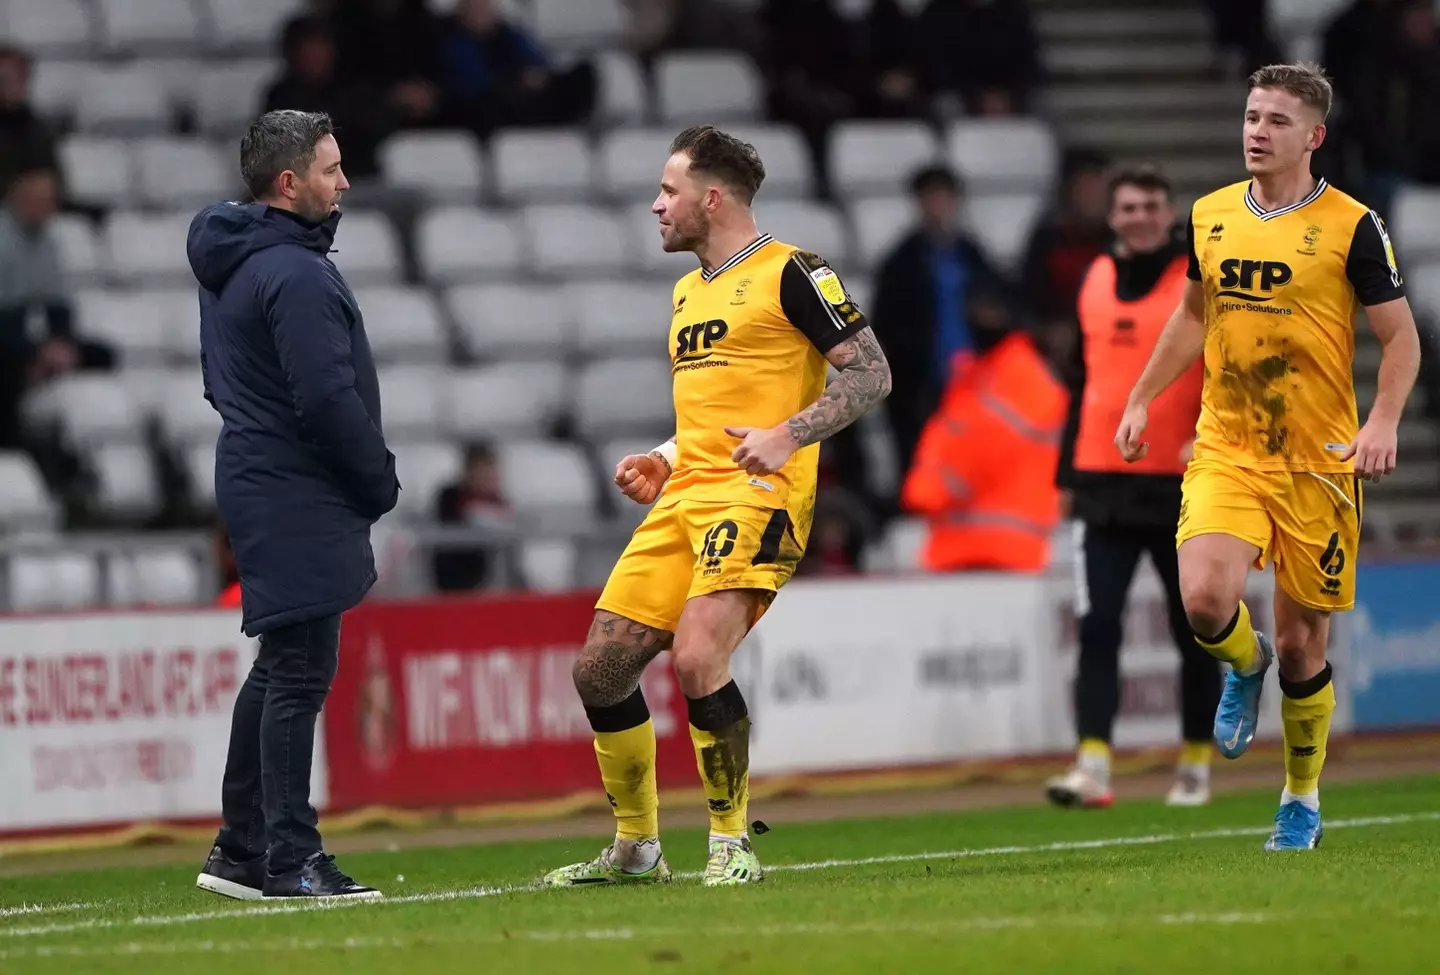 Maguire celebrated his opening goal in Lee Johnson's face (Image: Alamy)